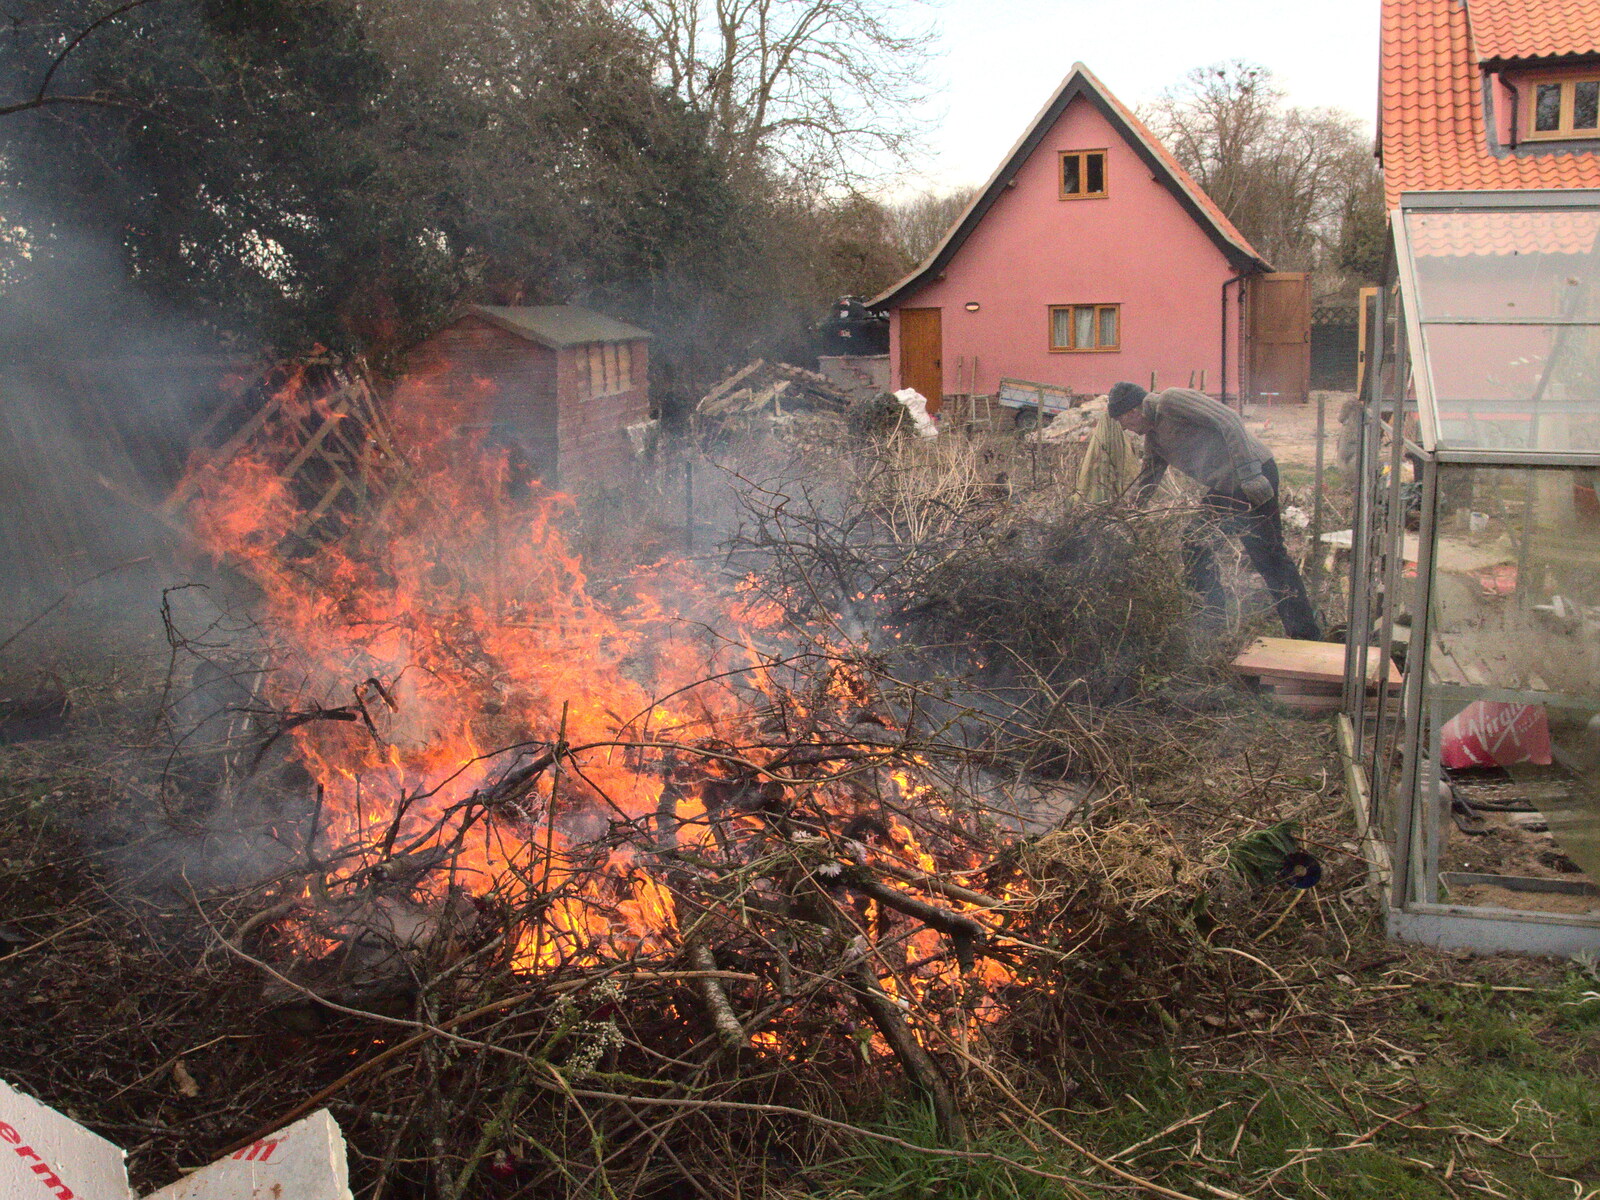 There's a big burn-up going on from A Crashed Car and Greenhouse Demolition, Brome, Suffolk - 20th March 2015